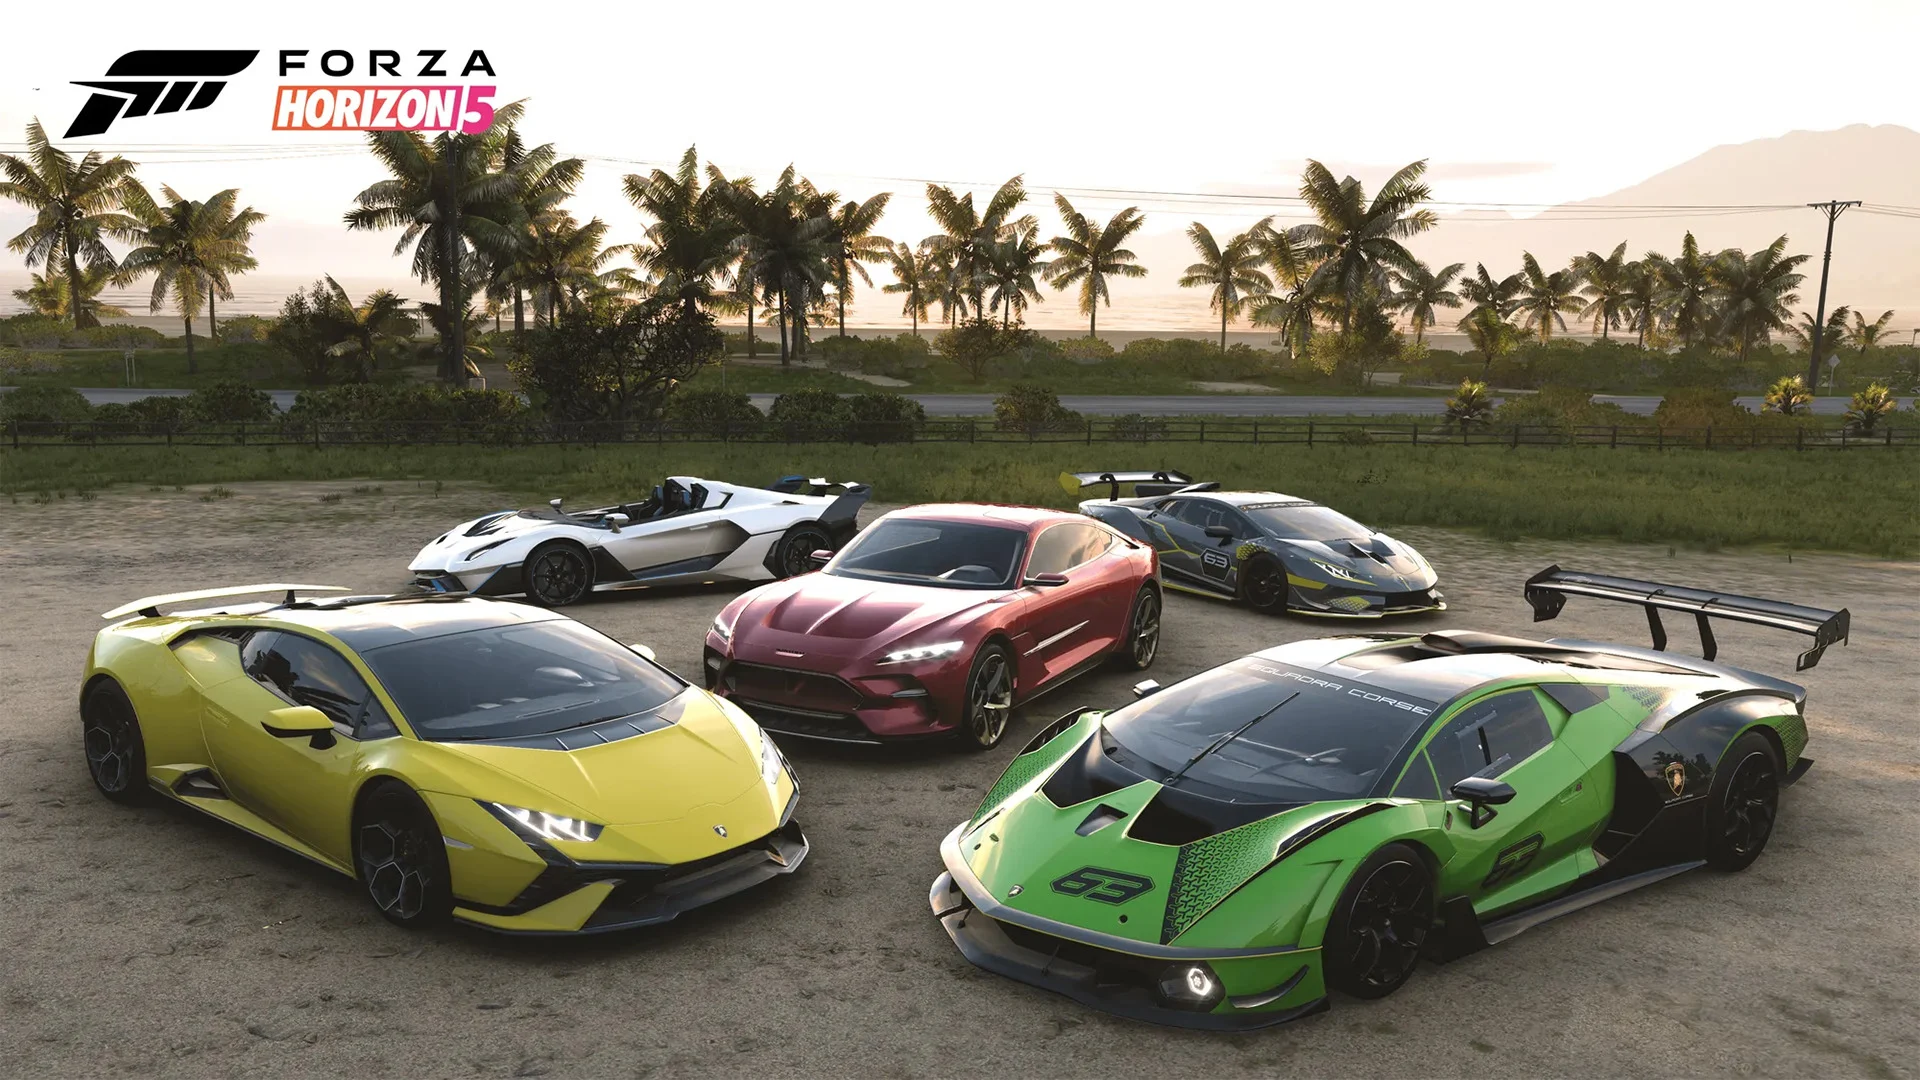 Will Forza Horizon 5 get more cars